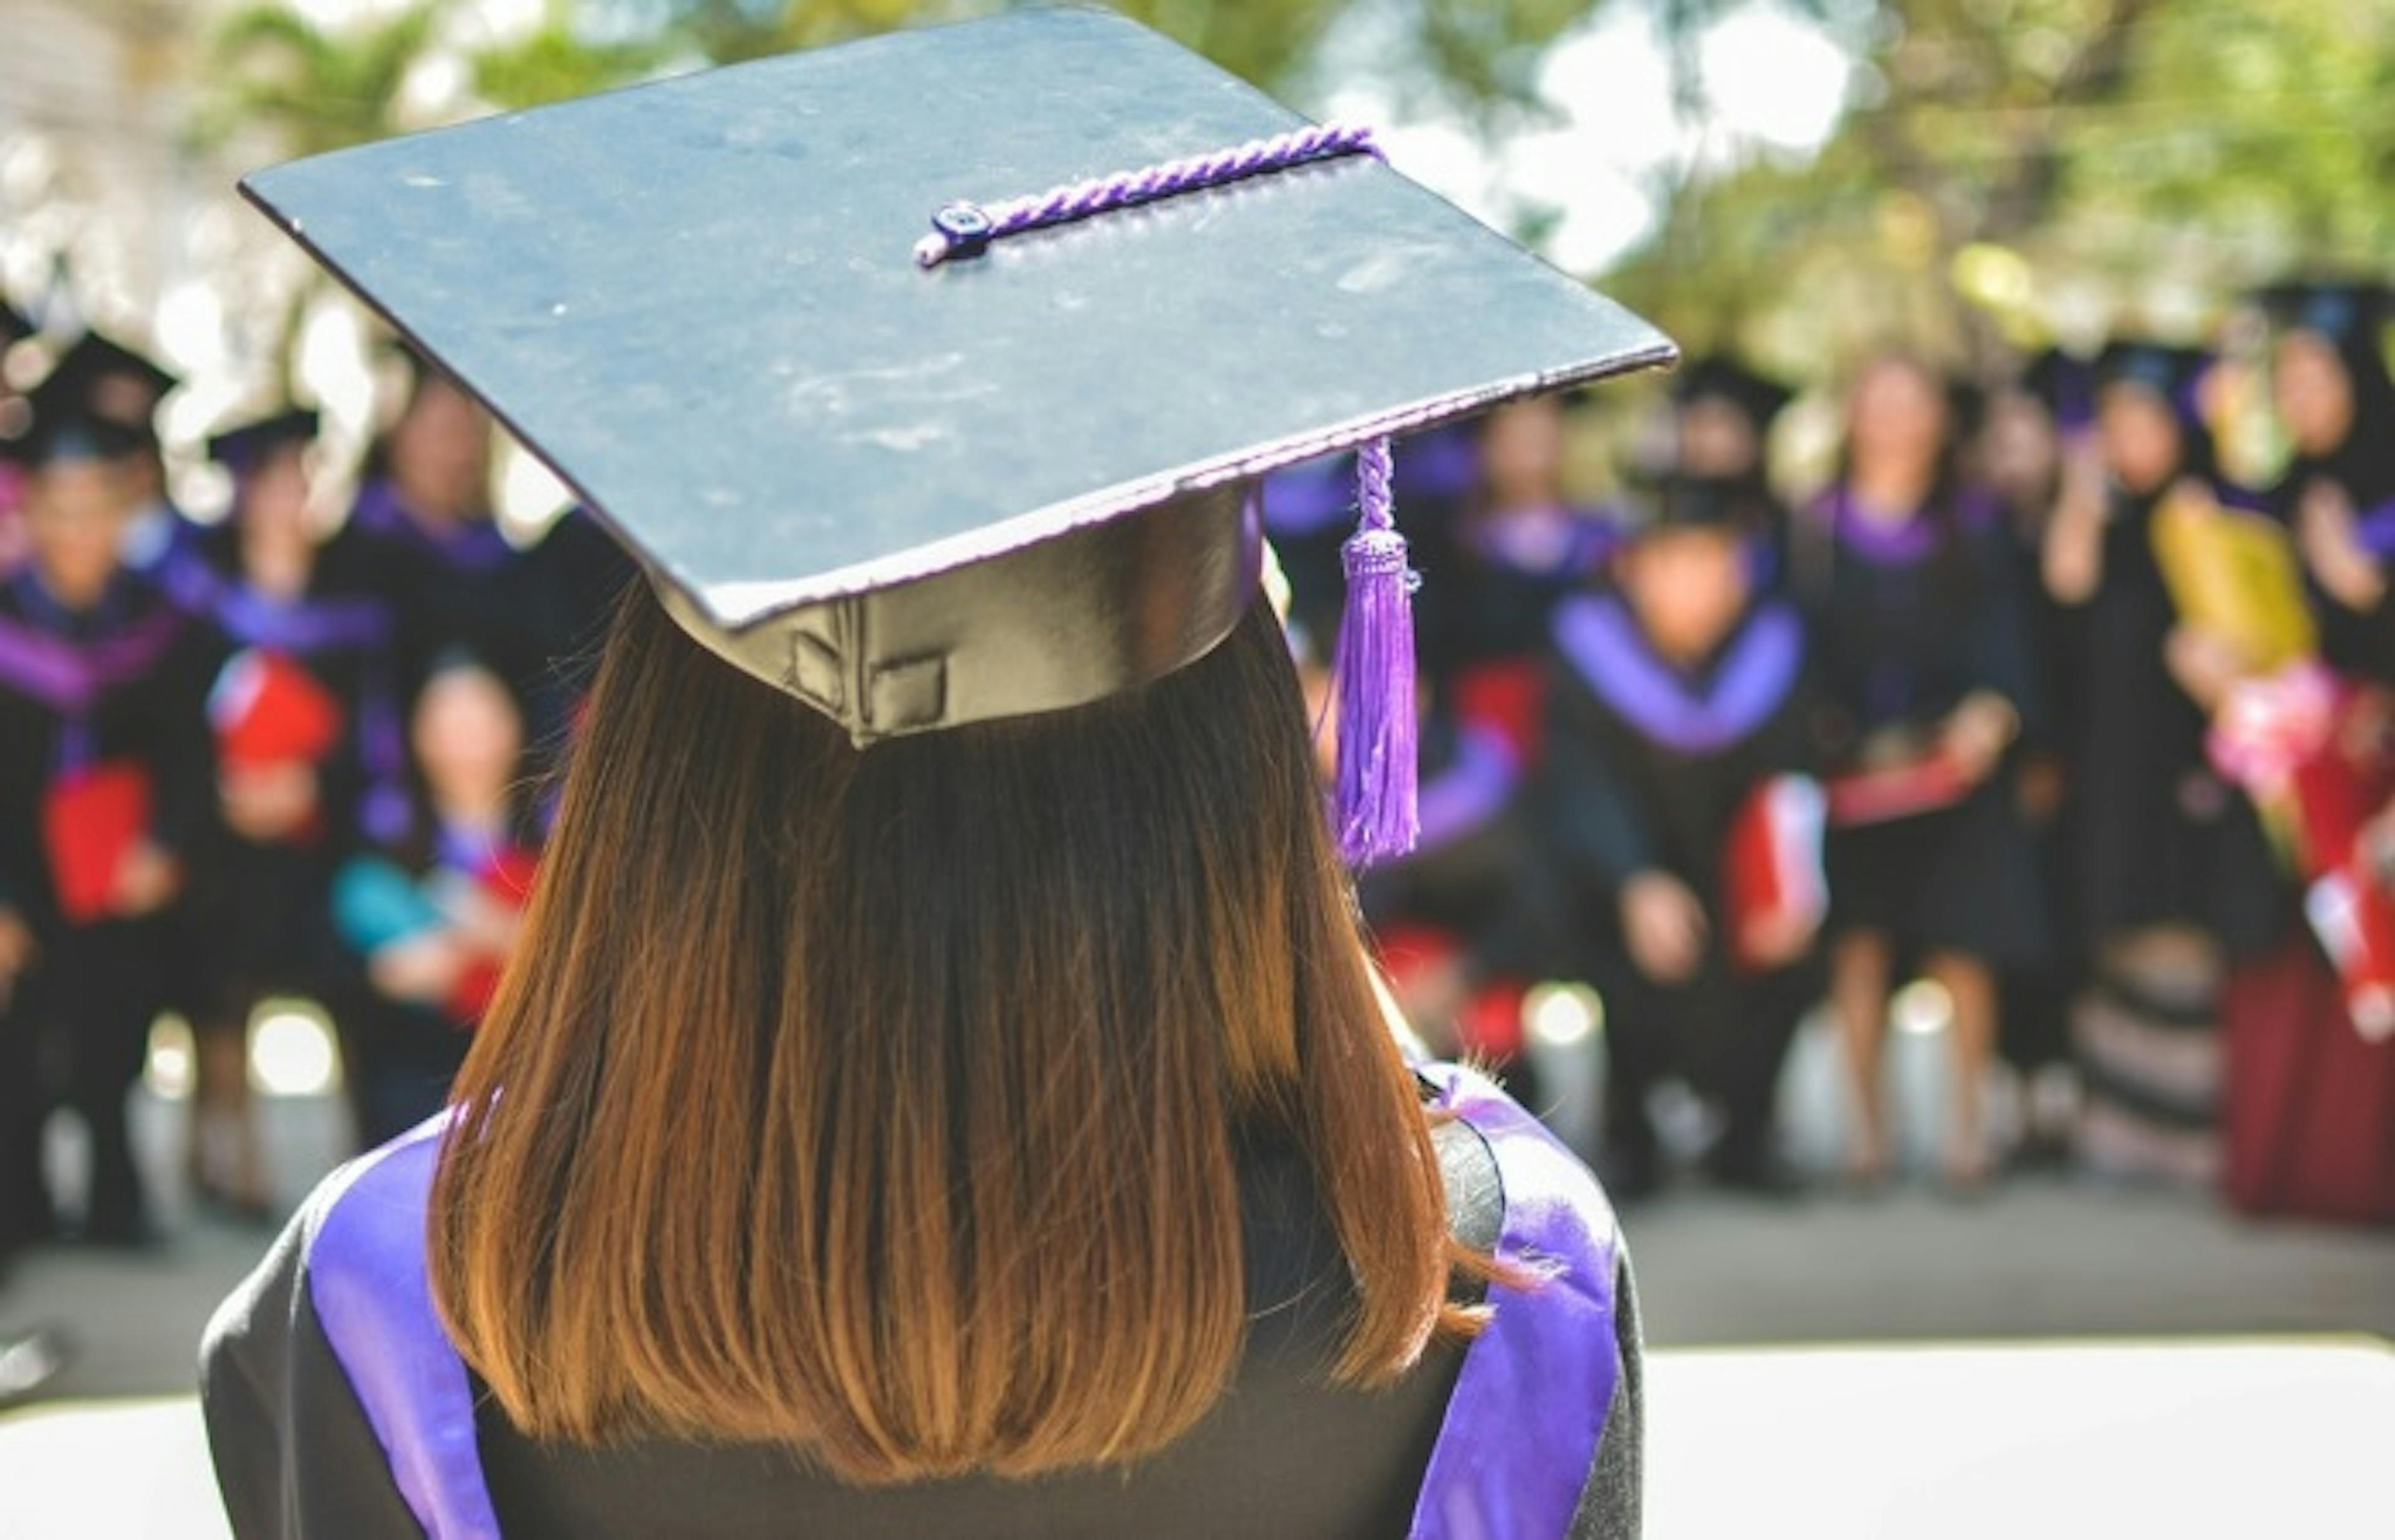 The back of the head of a woman waiting at a graduation ceremony